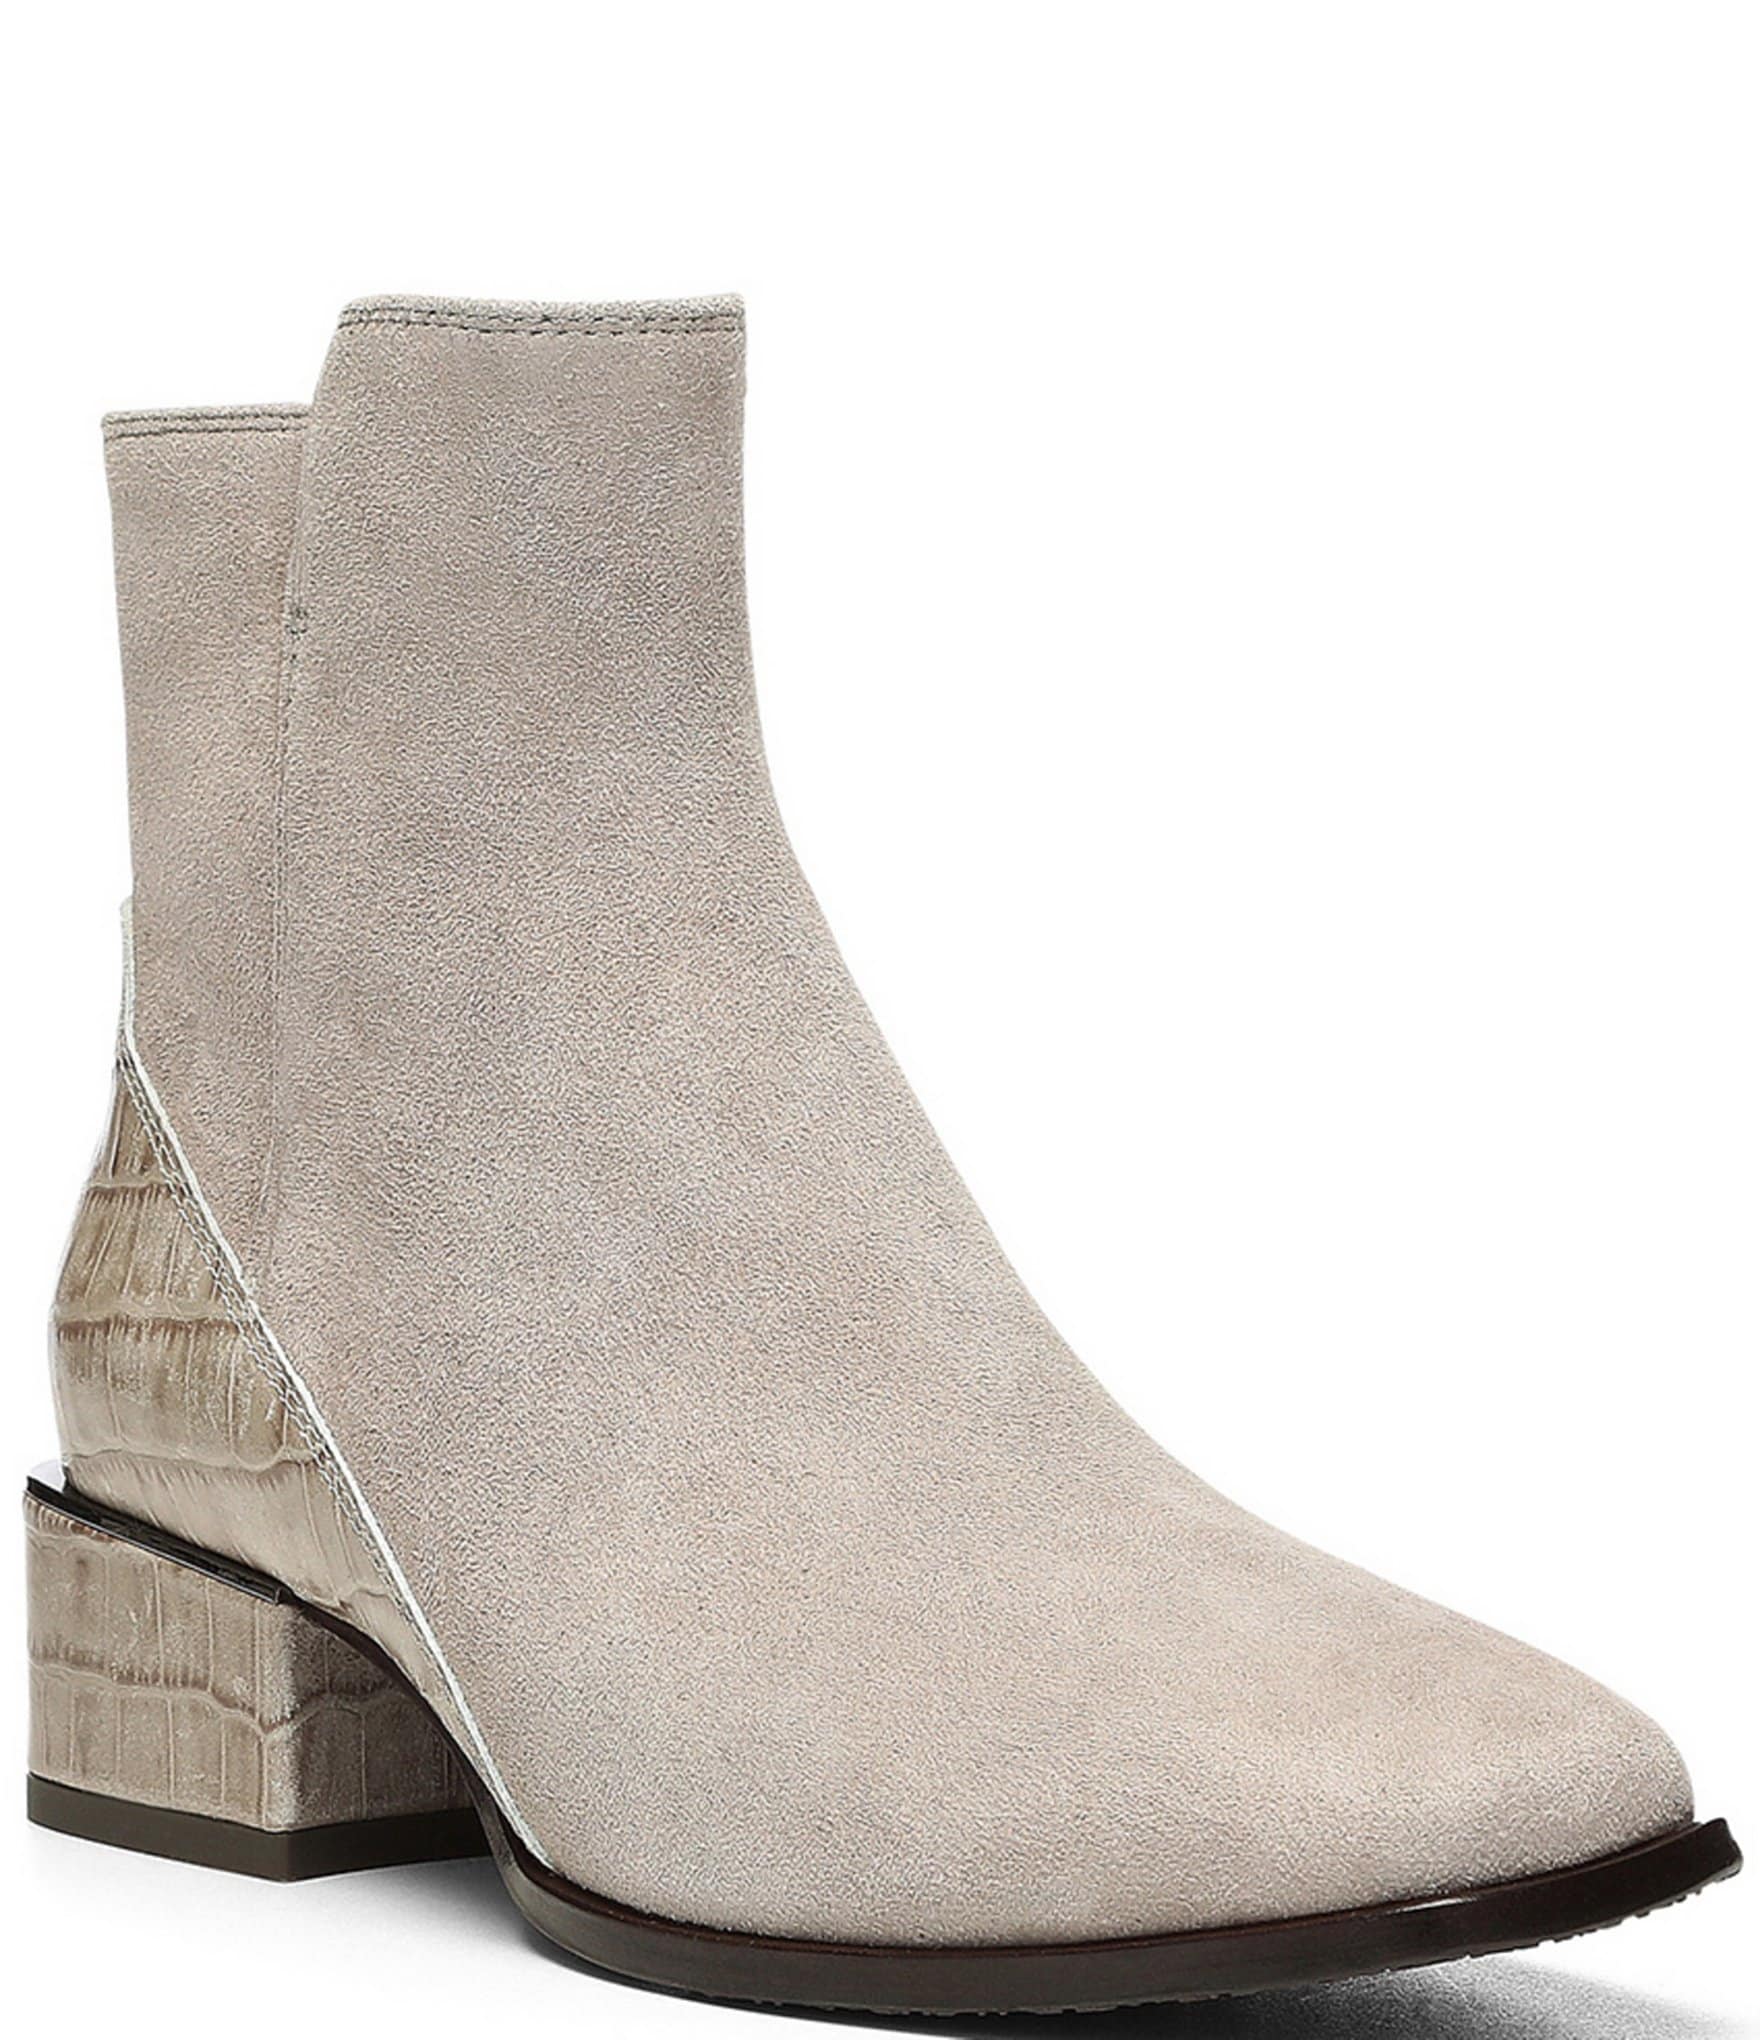 Donald Pliner Azia Suede Crocodile Embossed Leather Detail Booties